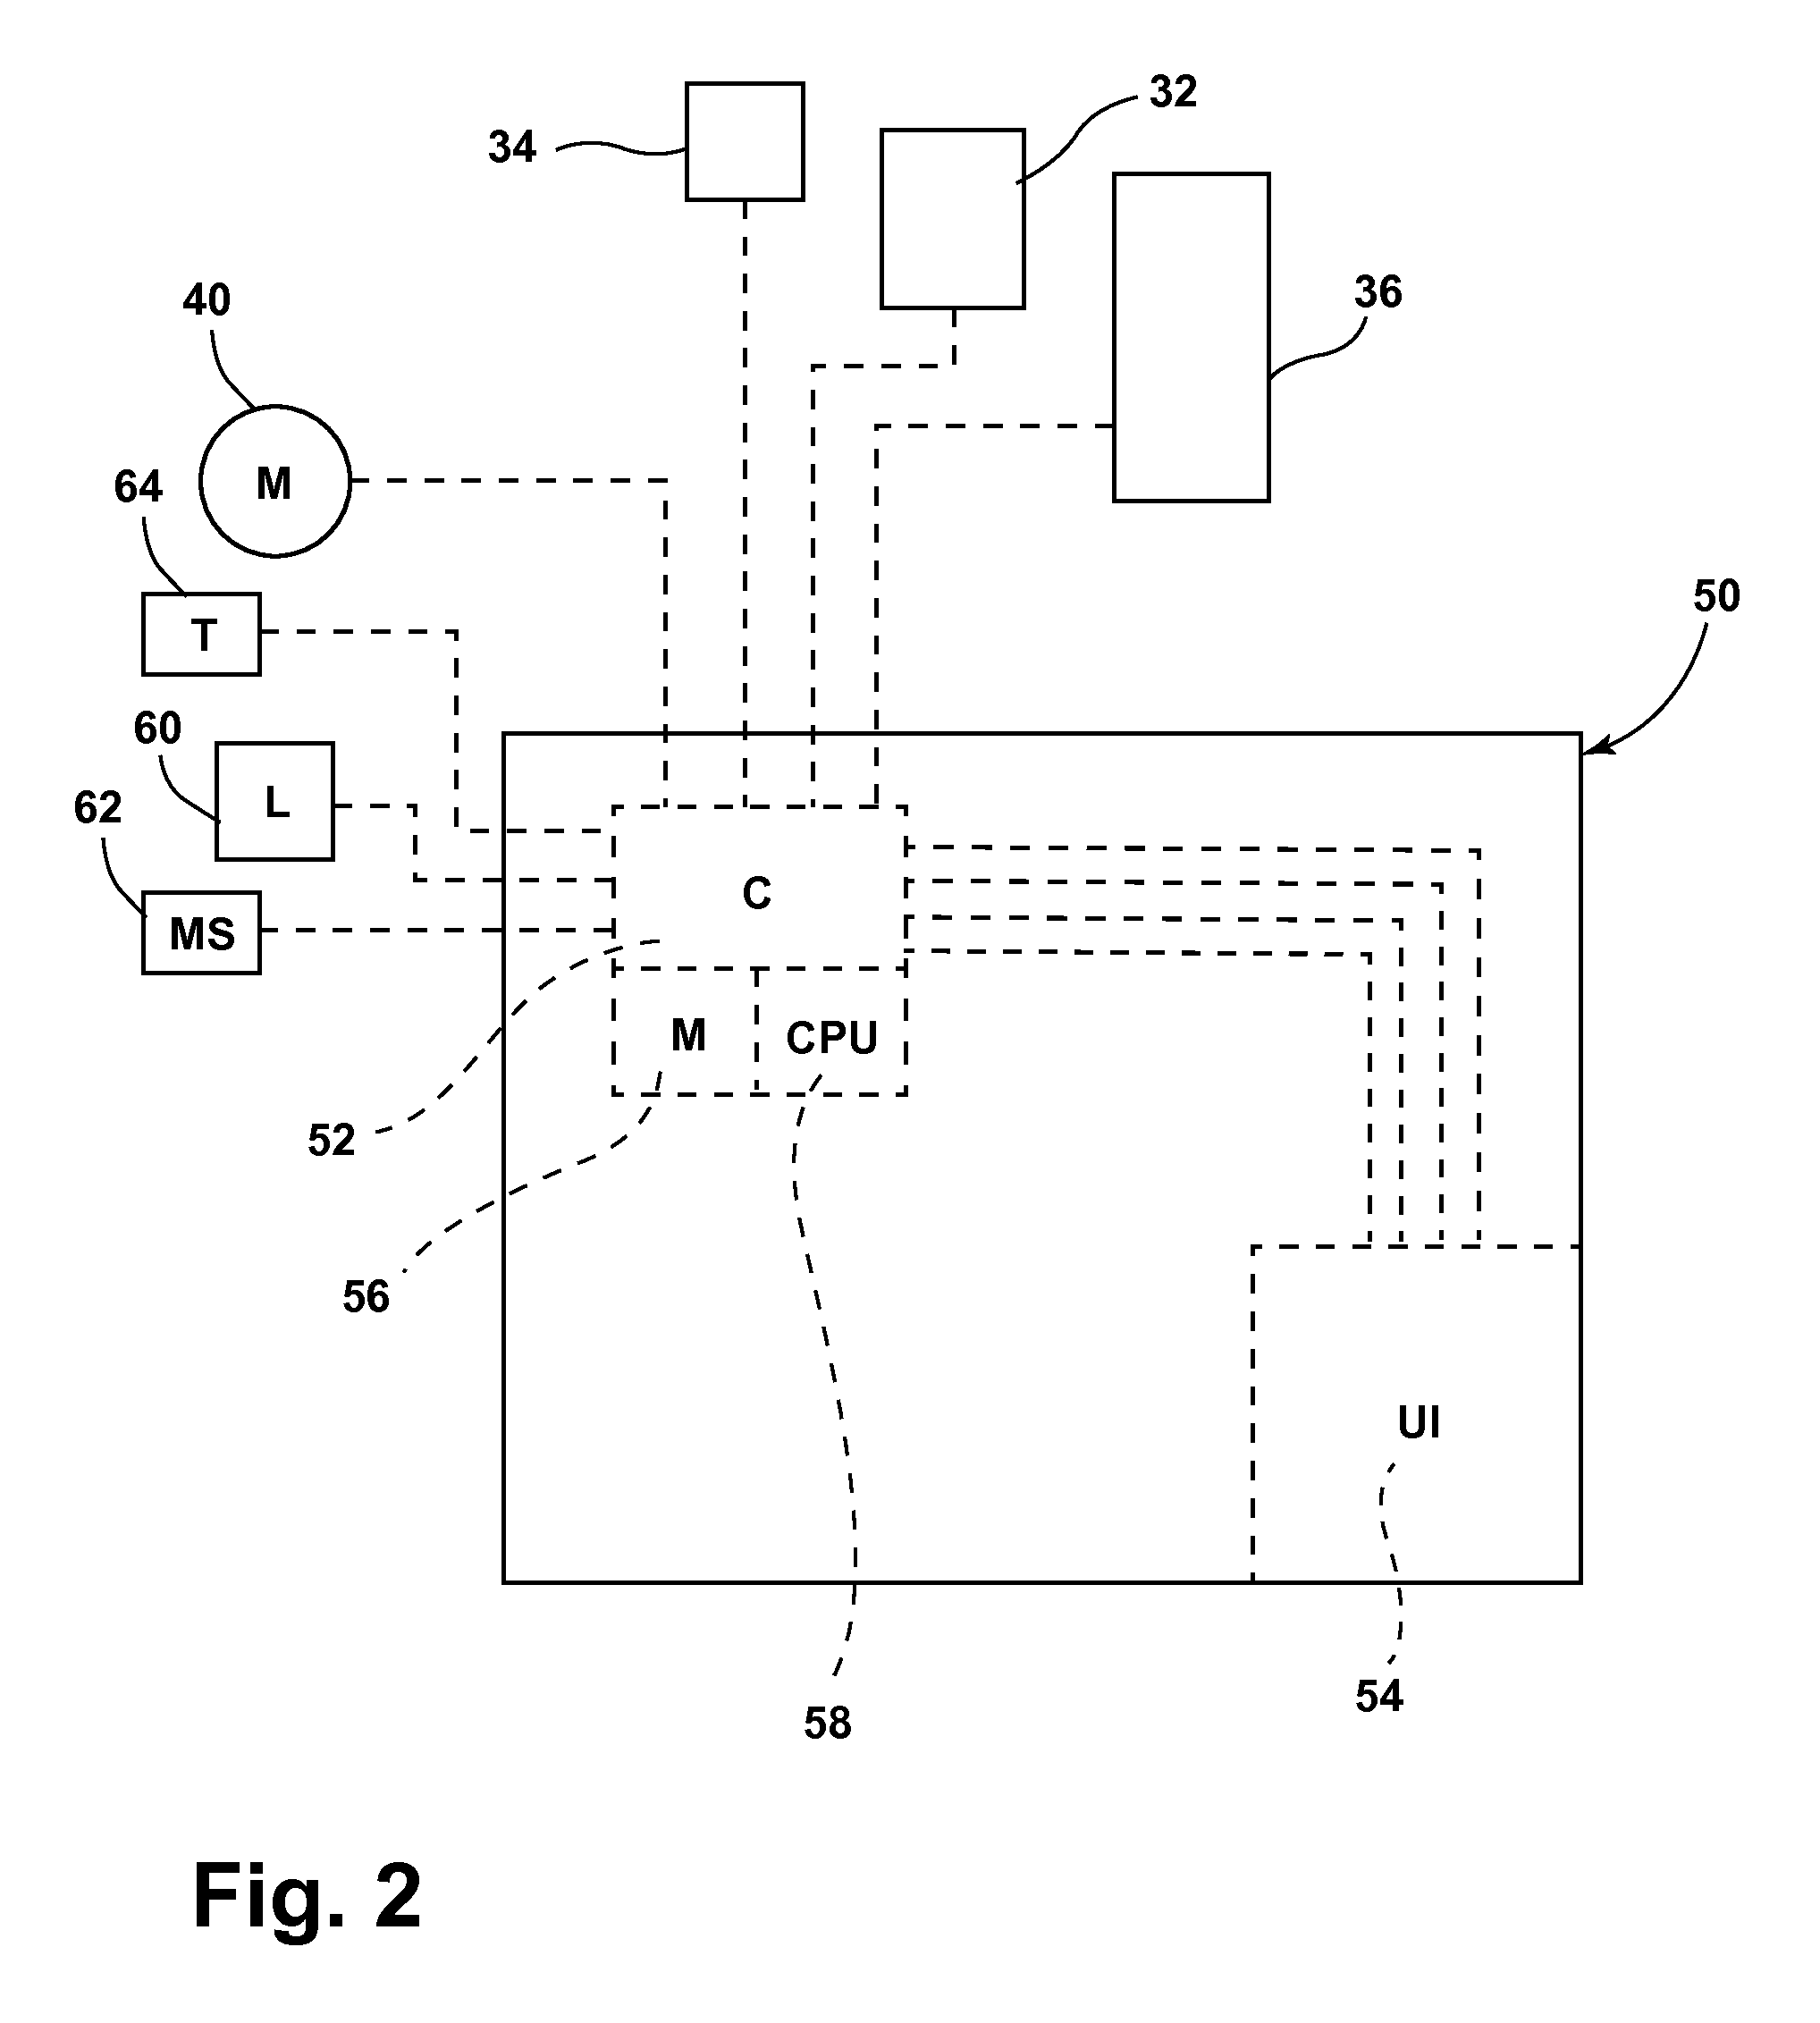 Method for detecting satellization speed of clothes load in a horizontal axis laundry treating appliance